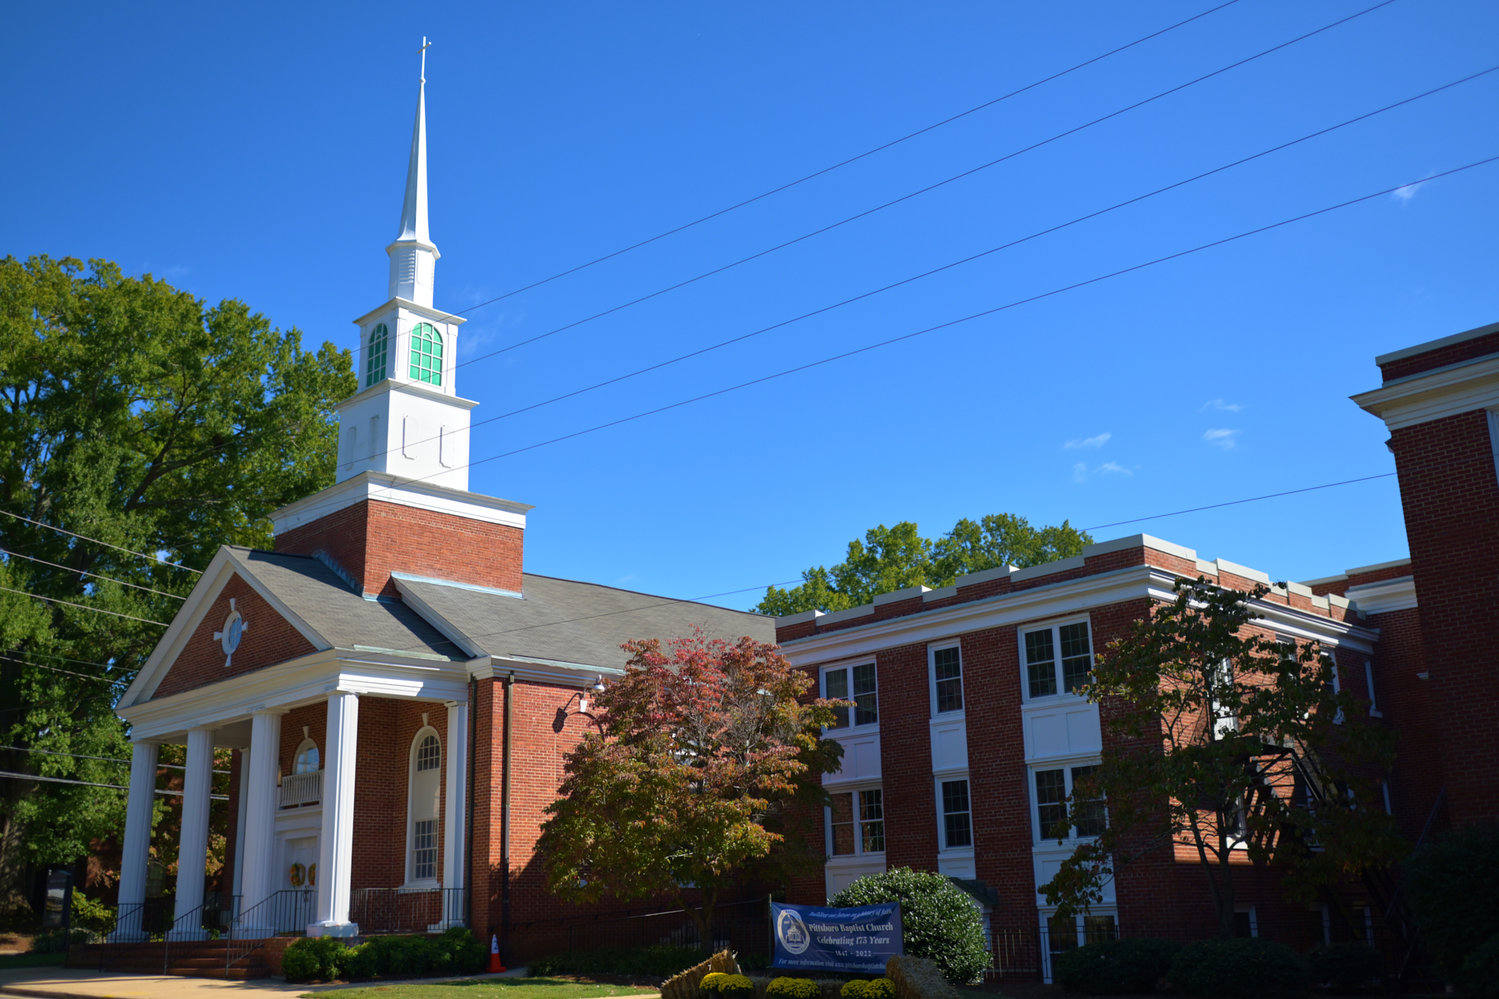 Pittsboro Baptist Church, celebrating its 175th year this year, is located on West Salisbury Street in Pittsboro.